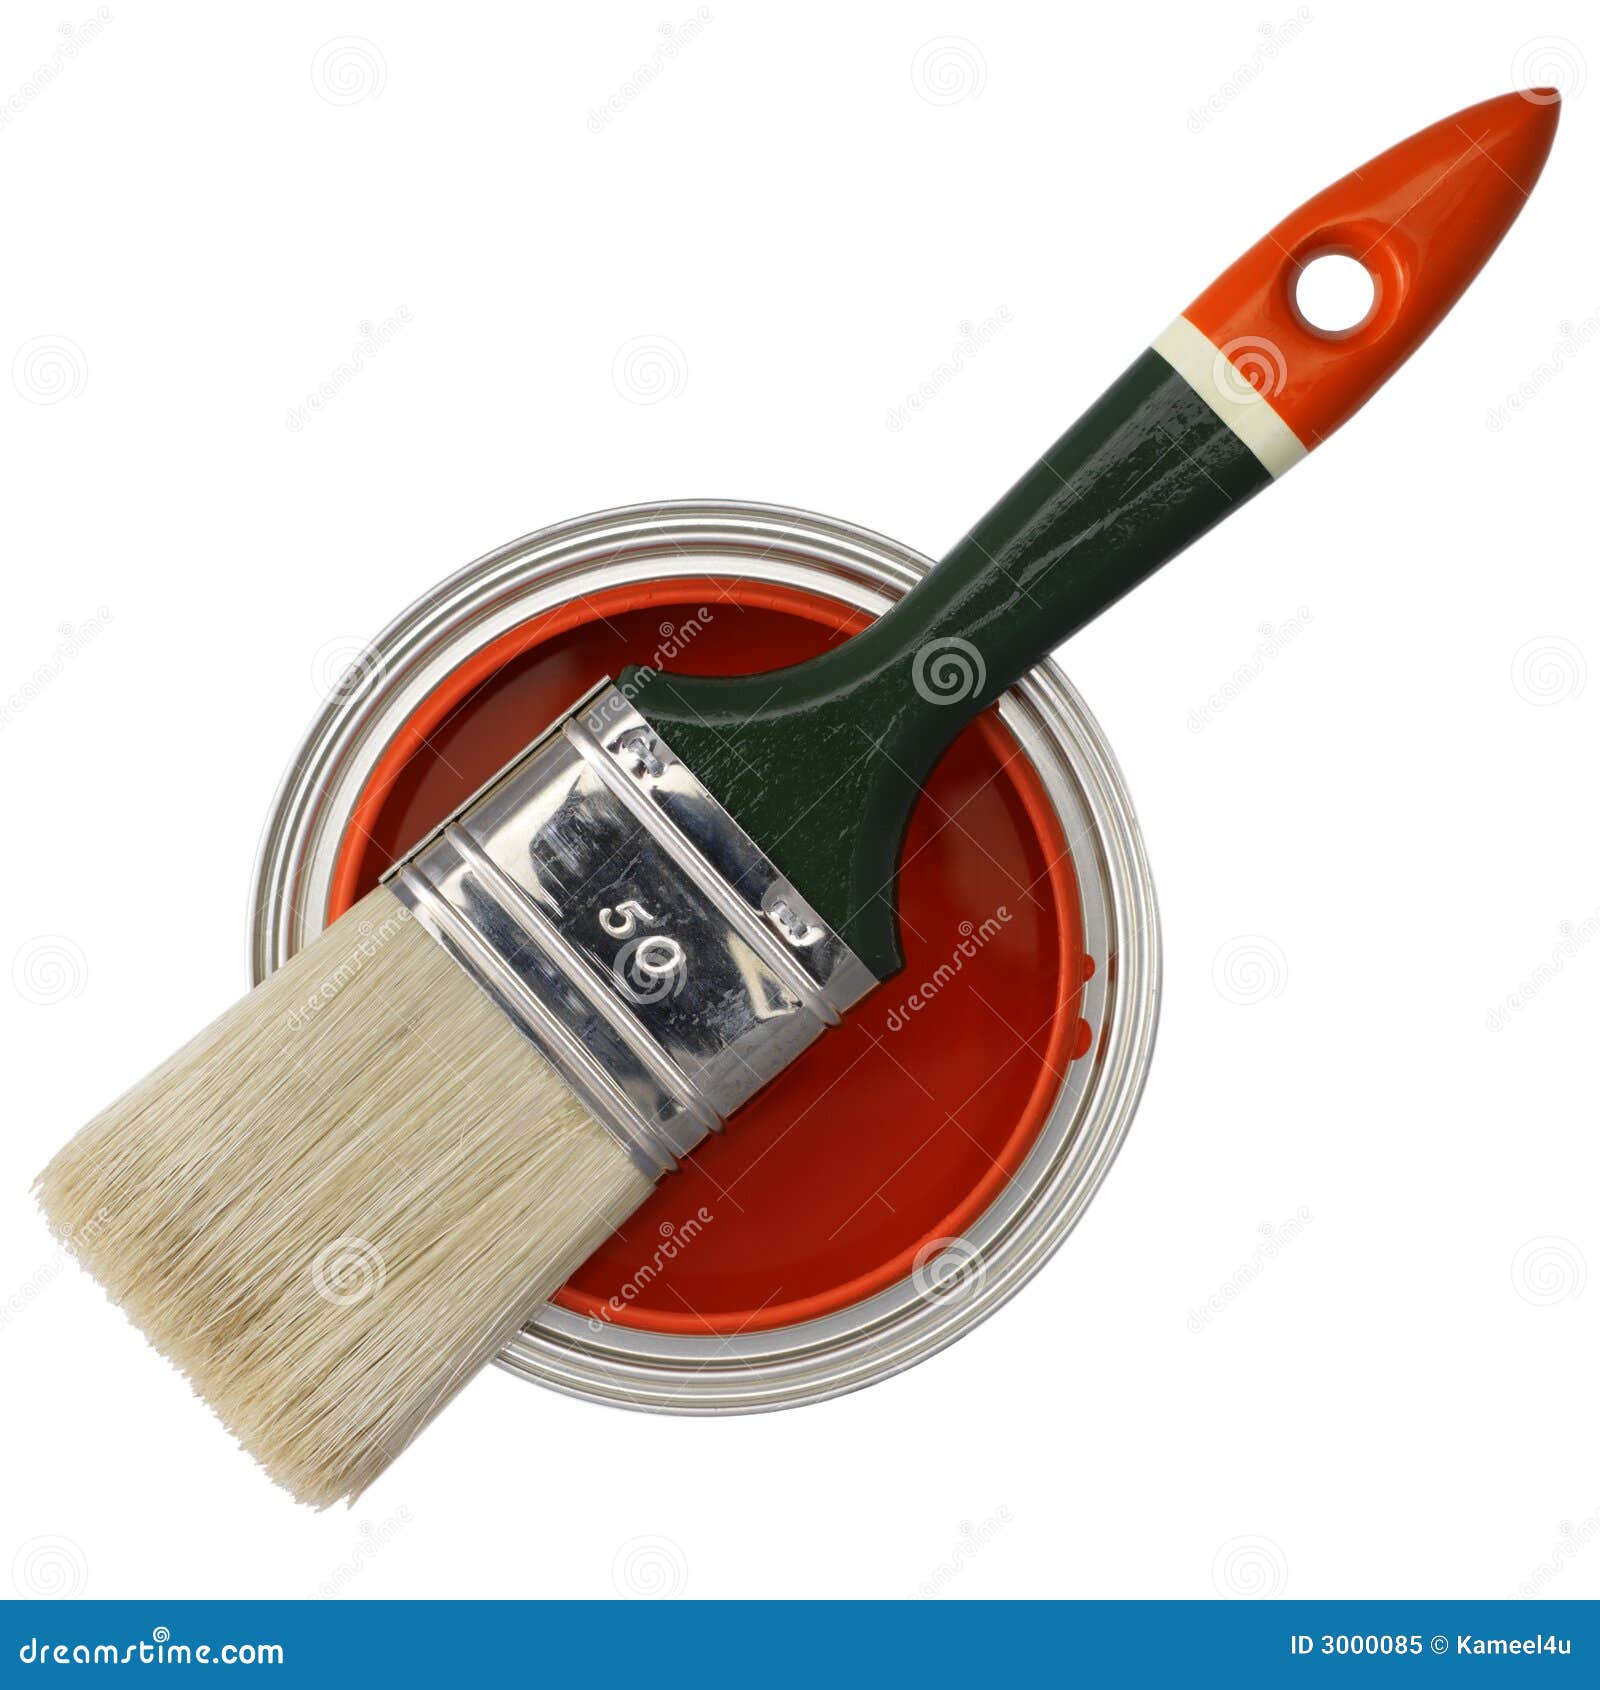 red paint and brush